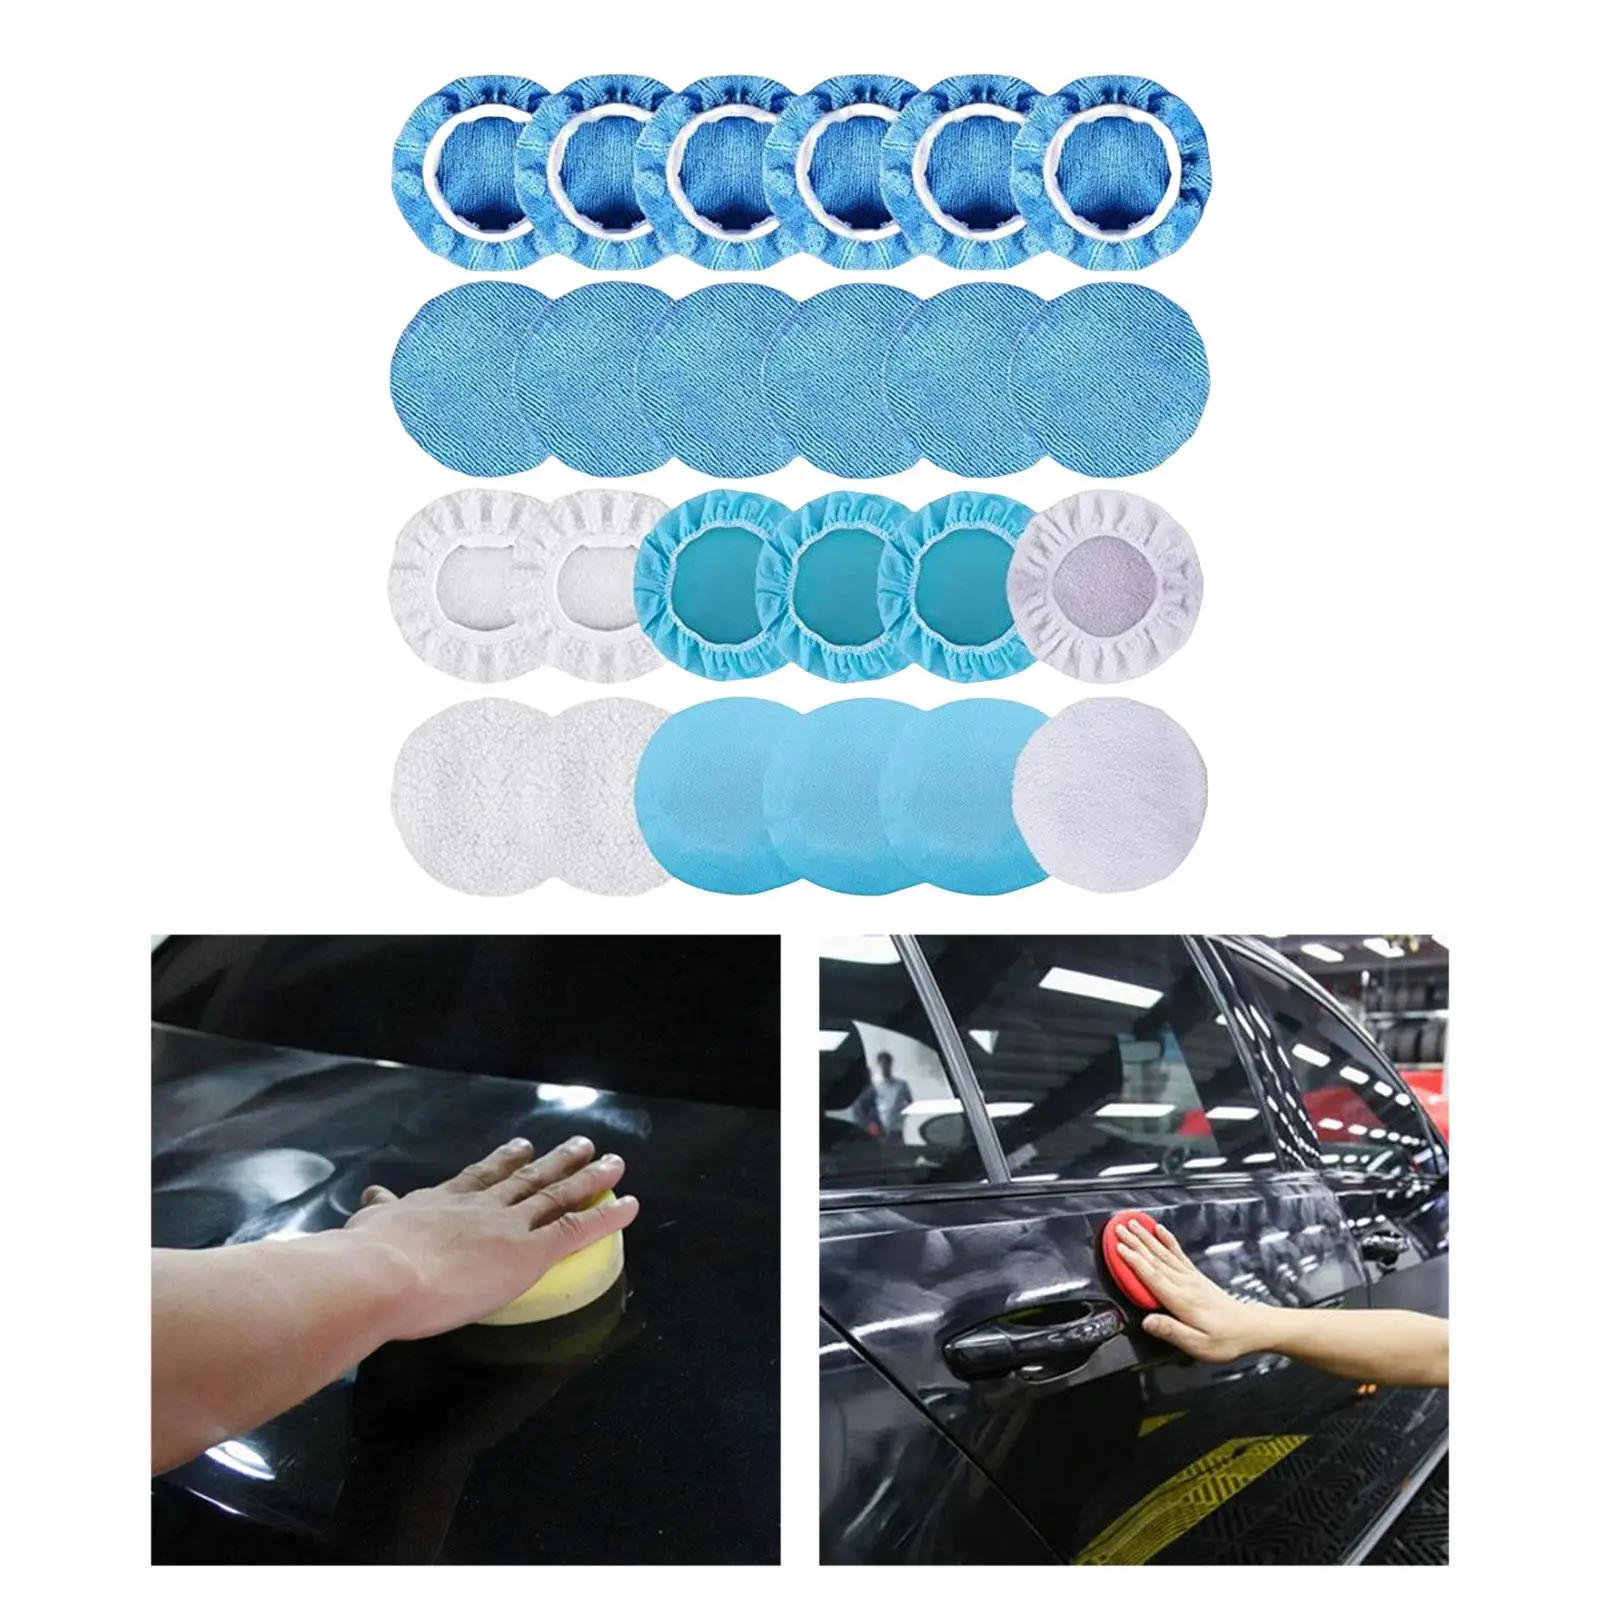 24Pcs Multipurpose Car Wax Applicator Pads Polisher Pad Cover Microfiber Detailing Buffing Pads for Interior Cleaning Polishing